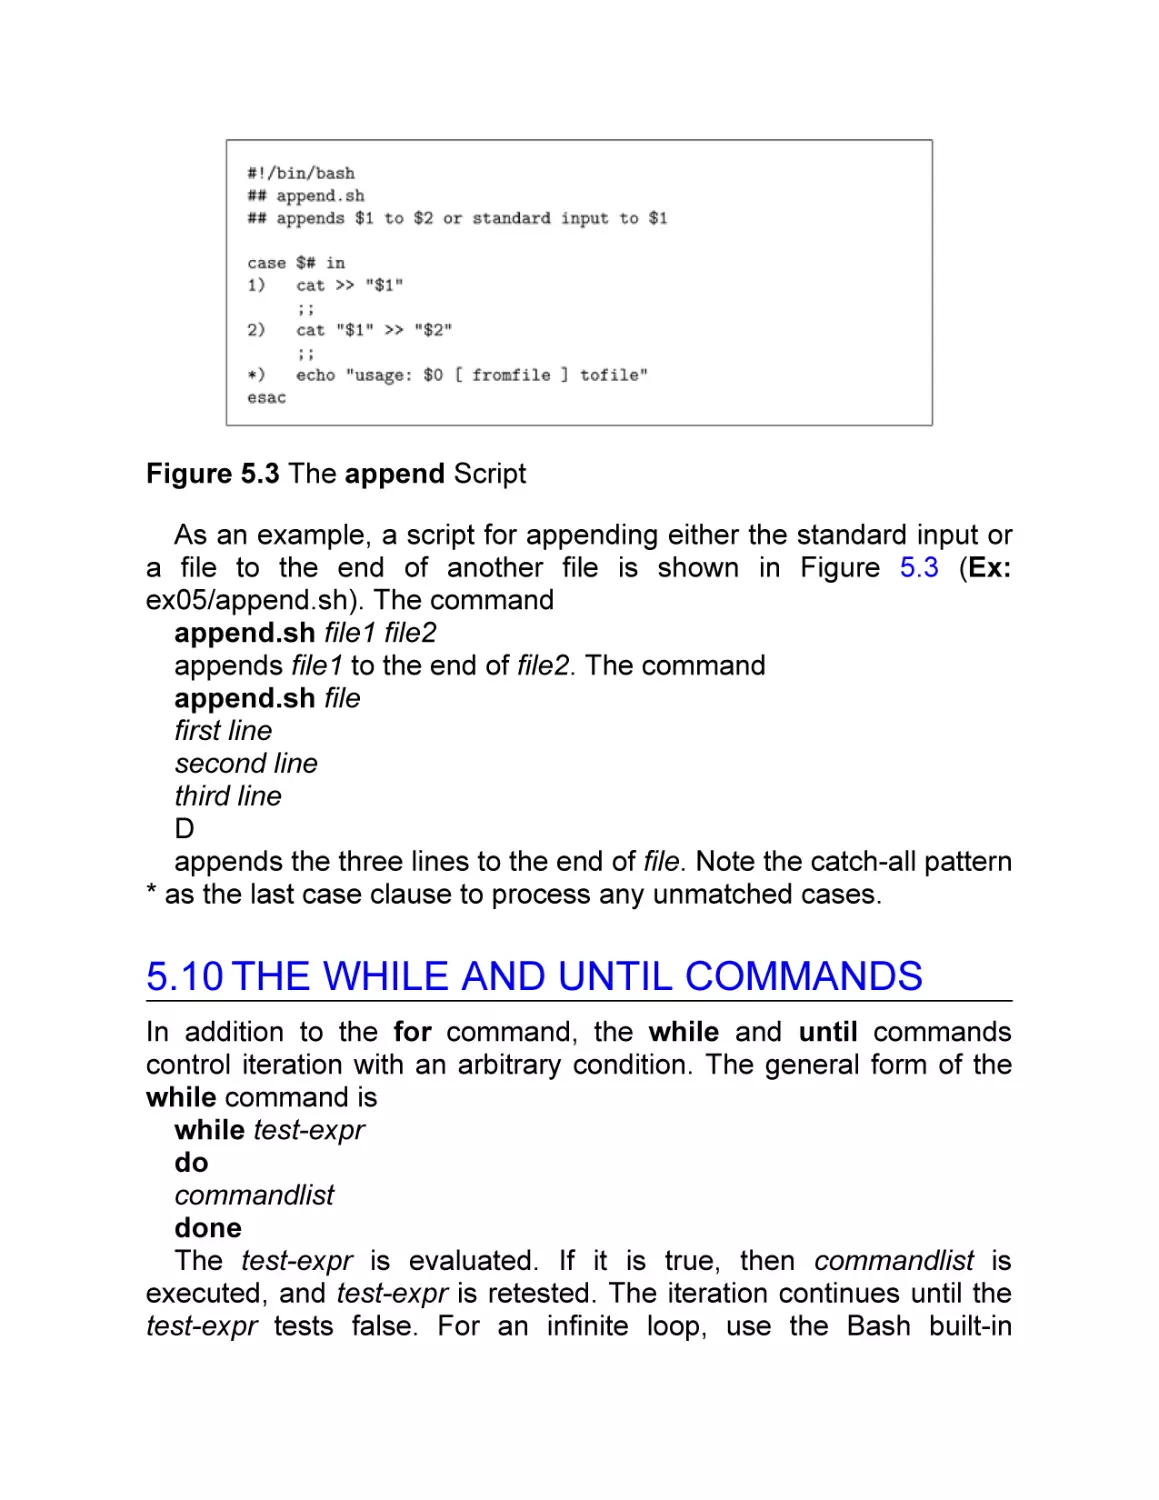 5.10 The while and until Commands